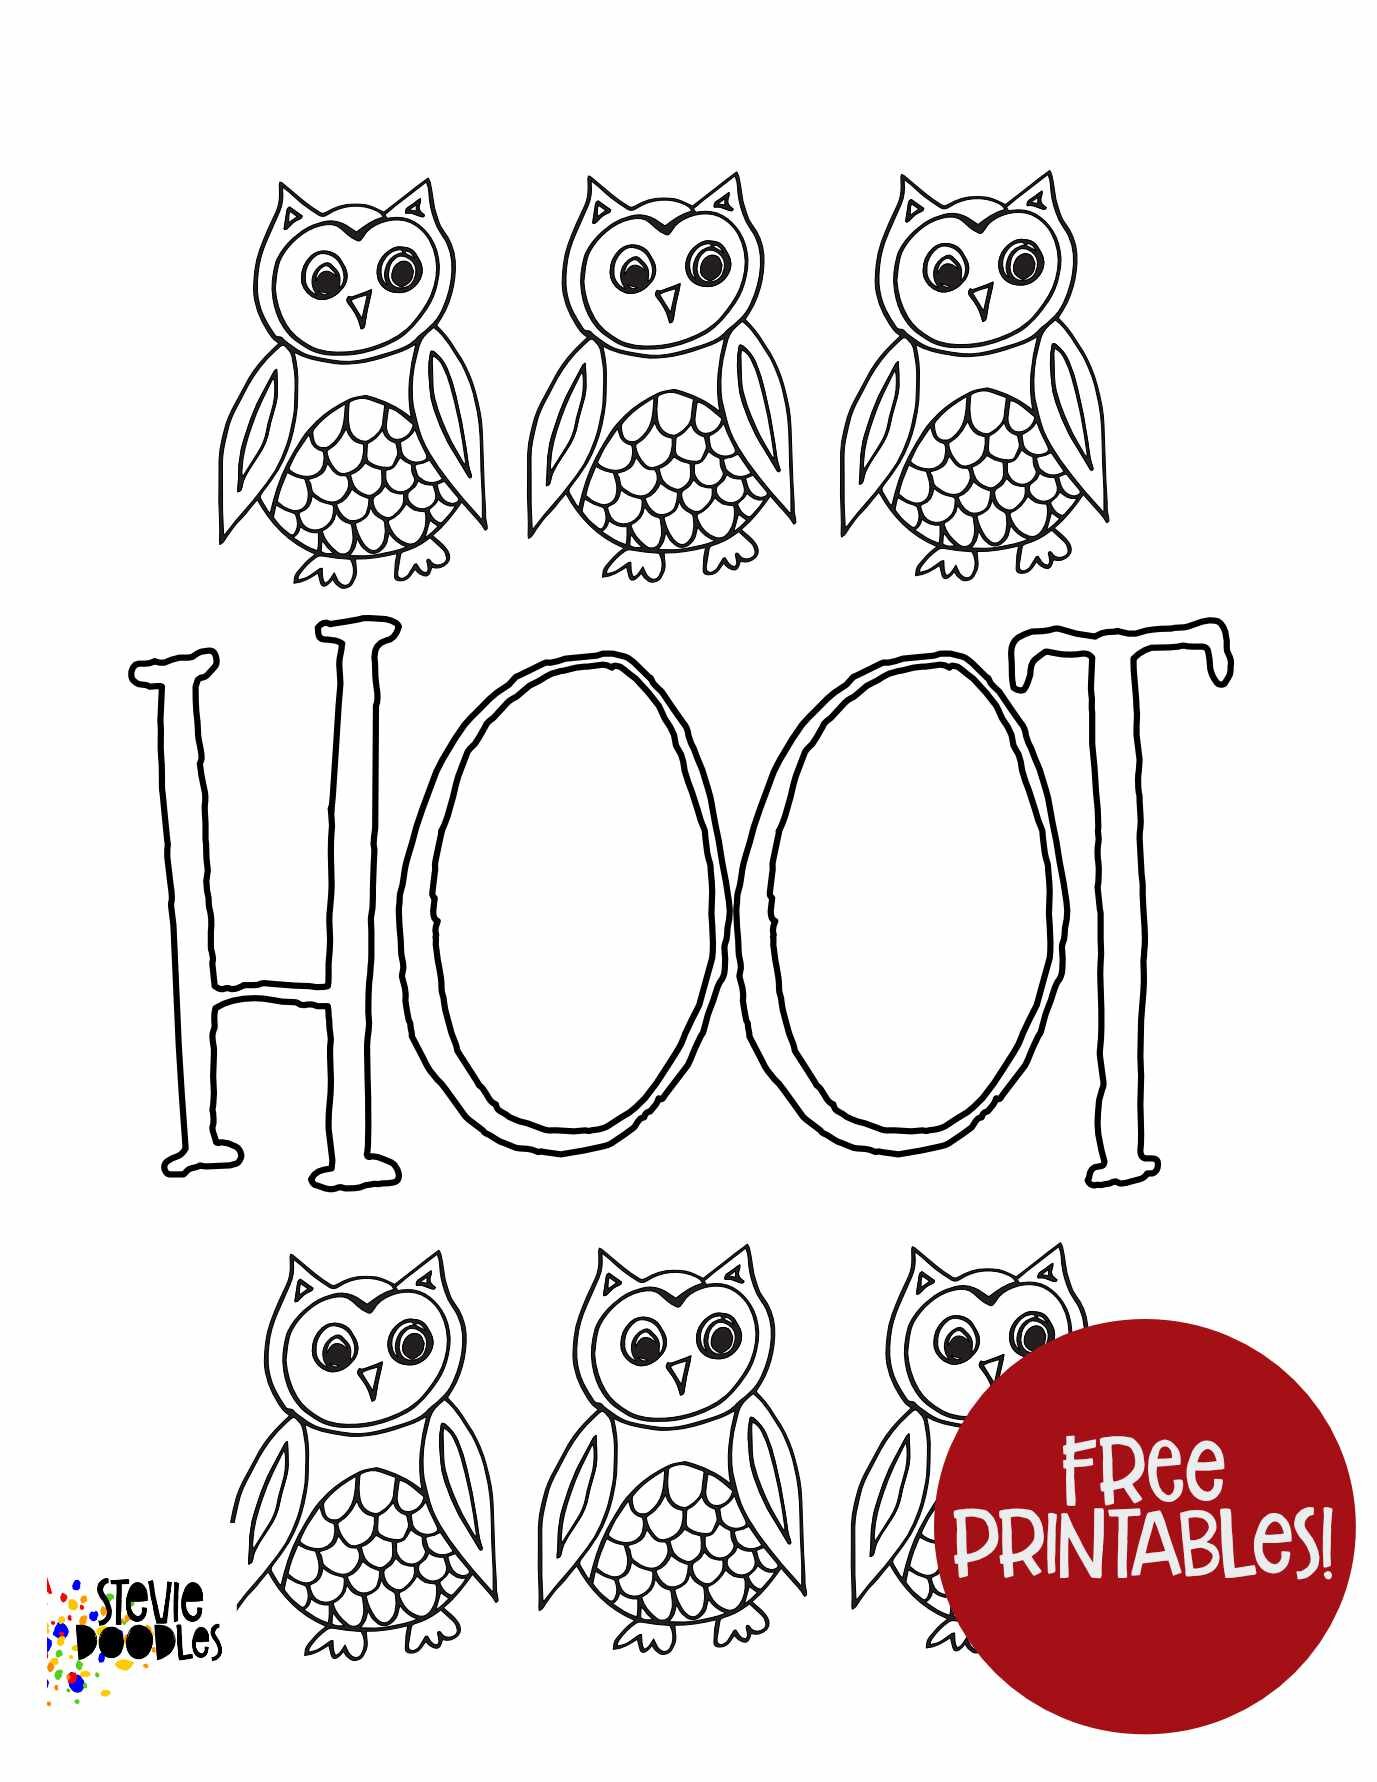 HOOT! Free Owl printable coloring sheet over 1000 free coloring pages at Stevie Doodles